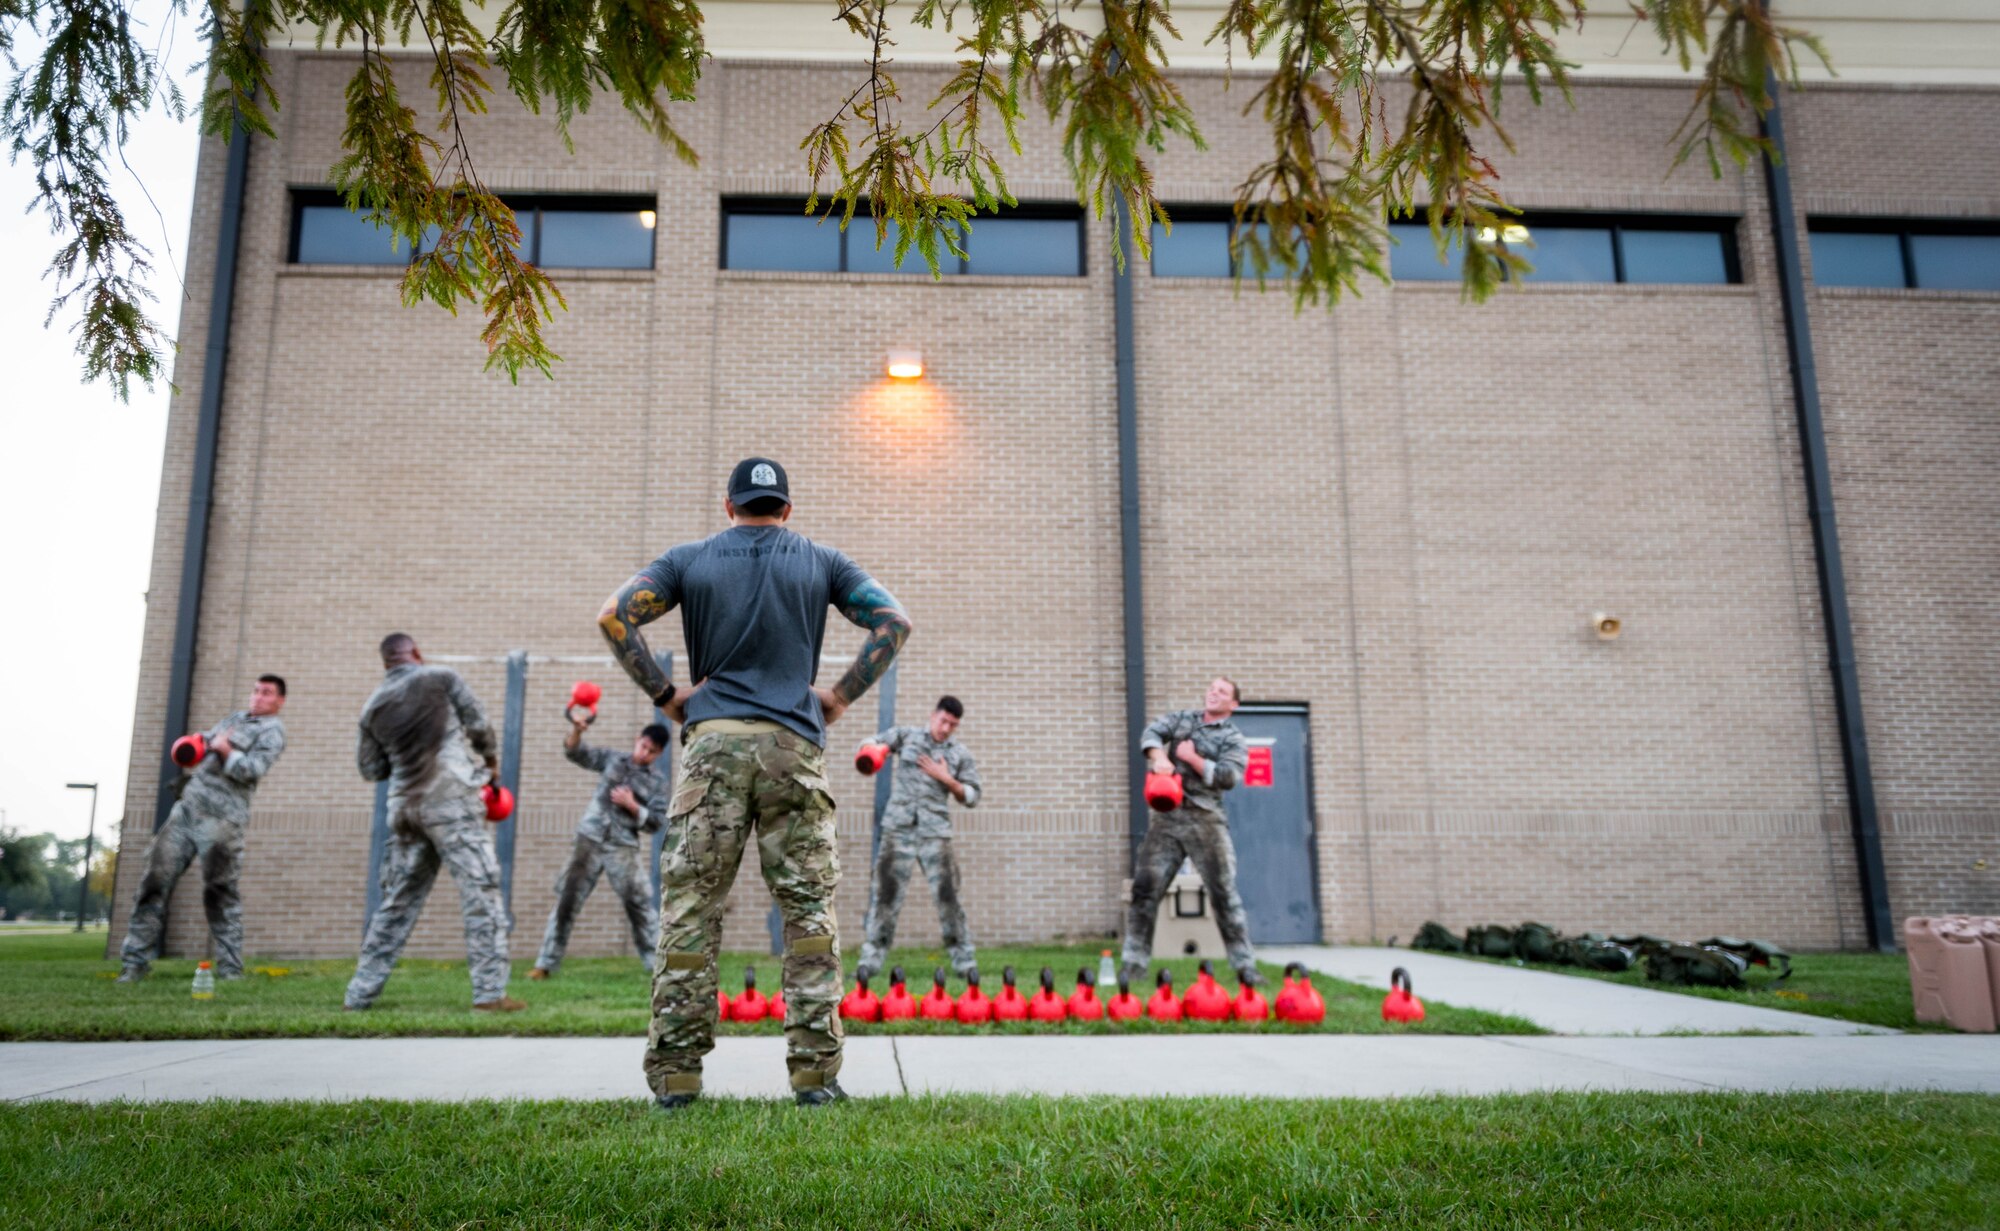 A 352nd Special Warfare Squadron training instructor looks on as Airmen from the 352nd SWTS participate in a memorial physical training session outside of Matero Hall on Keesler Air Force Base, Mississippi, Aug. 9, 2019. The PT event was in memory of U.S. Air Force Staff Sgt. Andrew Harvell, combat controller, who was killed in action on Aug. 6, 2011. Special Warfare trainees also attend courses in the 334th and 335th Training Squadrons. (U.S. Air Force photo by Sarah Loicano)